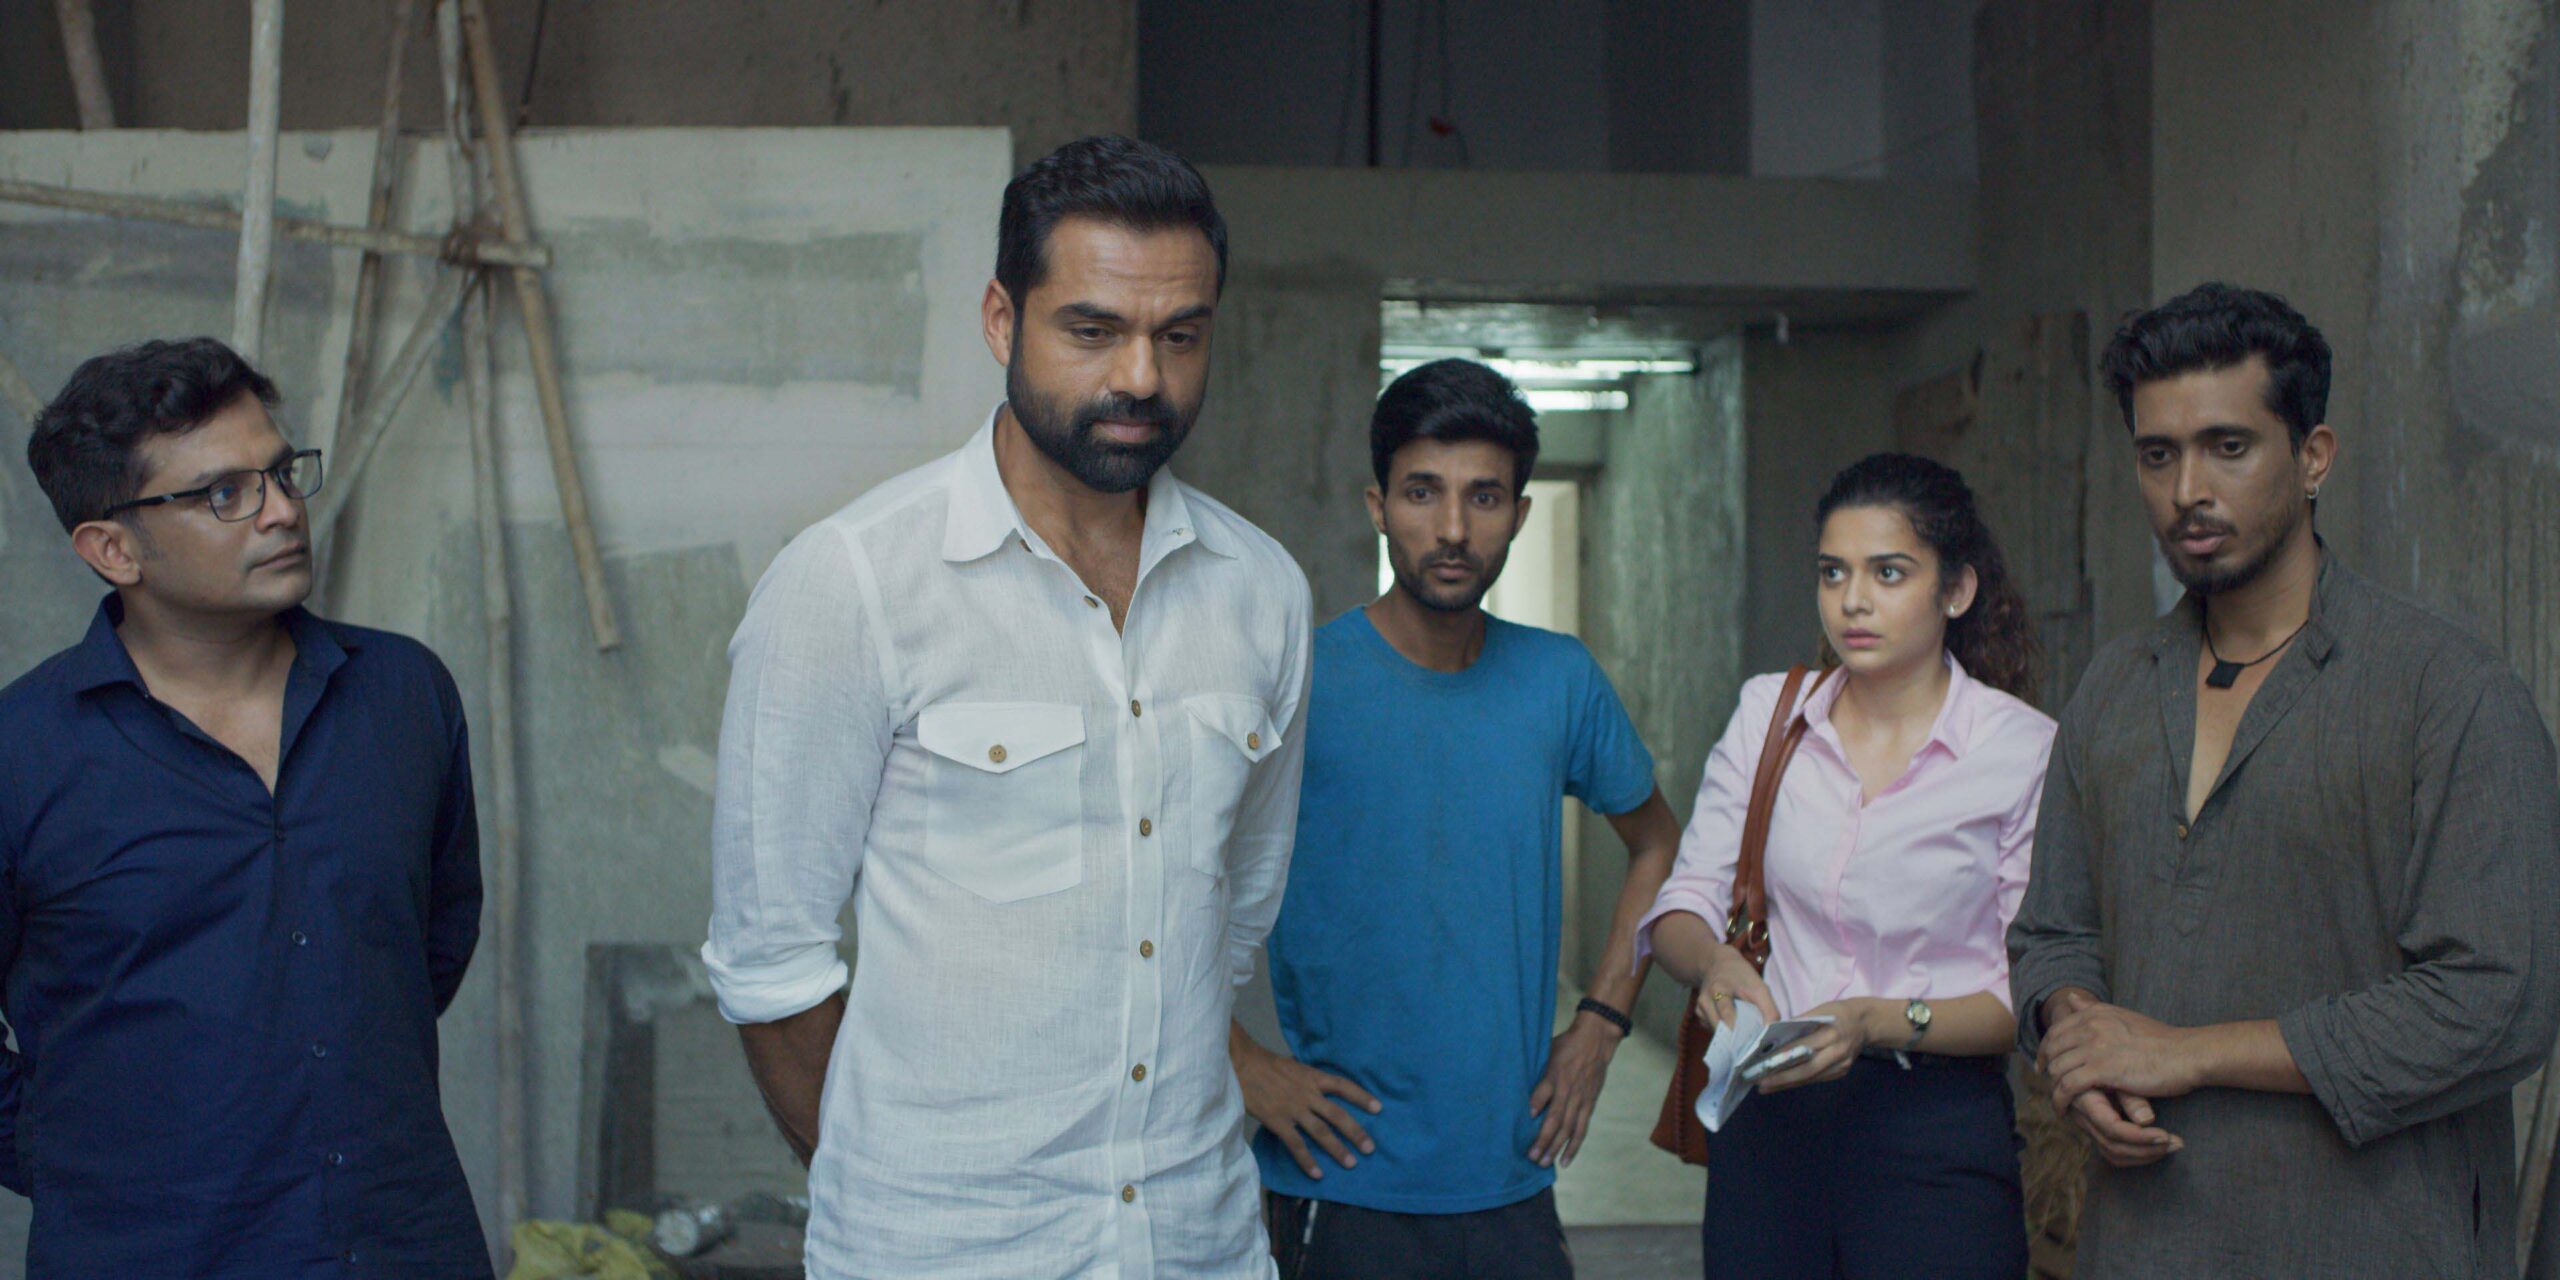 Abhay Deol (second from left) and Mithila Palkar (second from right) in Chopsticks